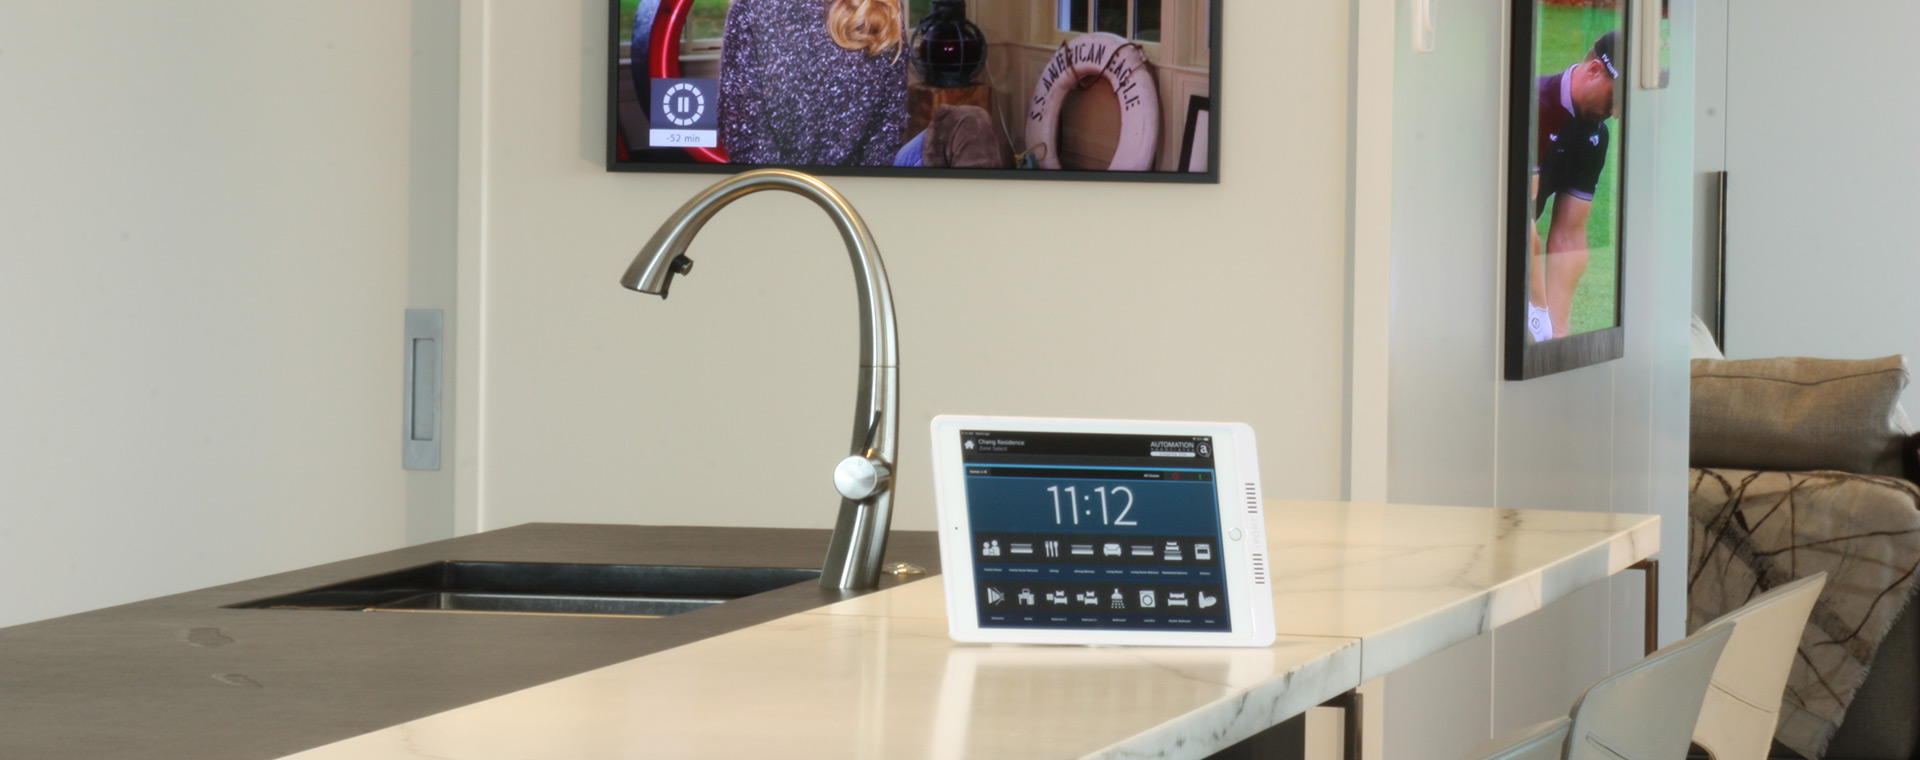 Kitchen TV and audio system controlled by a mobile tablet on kitchen bench